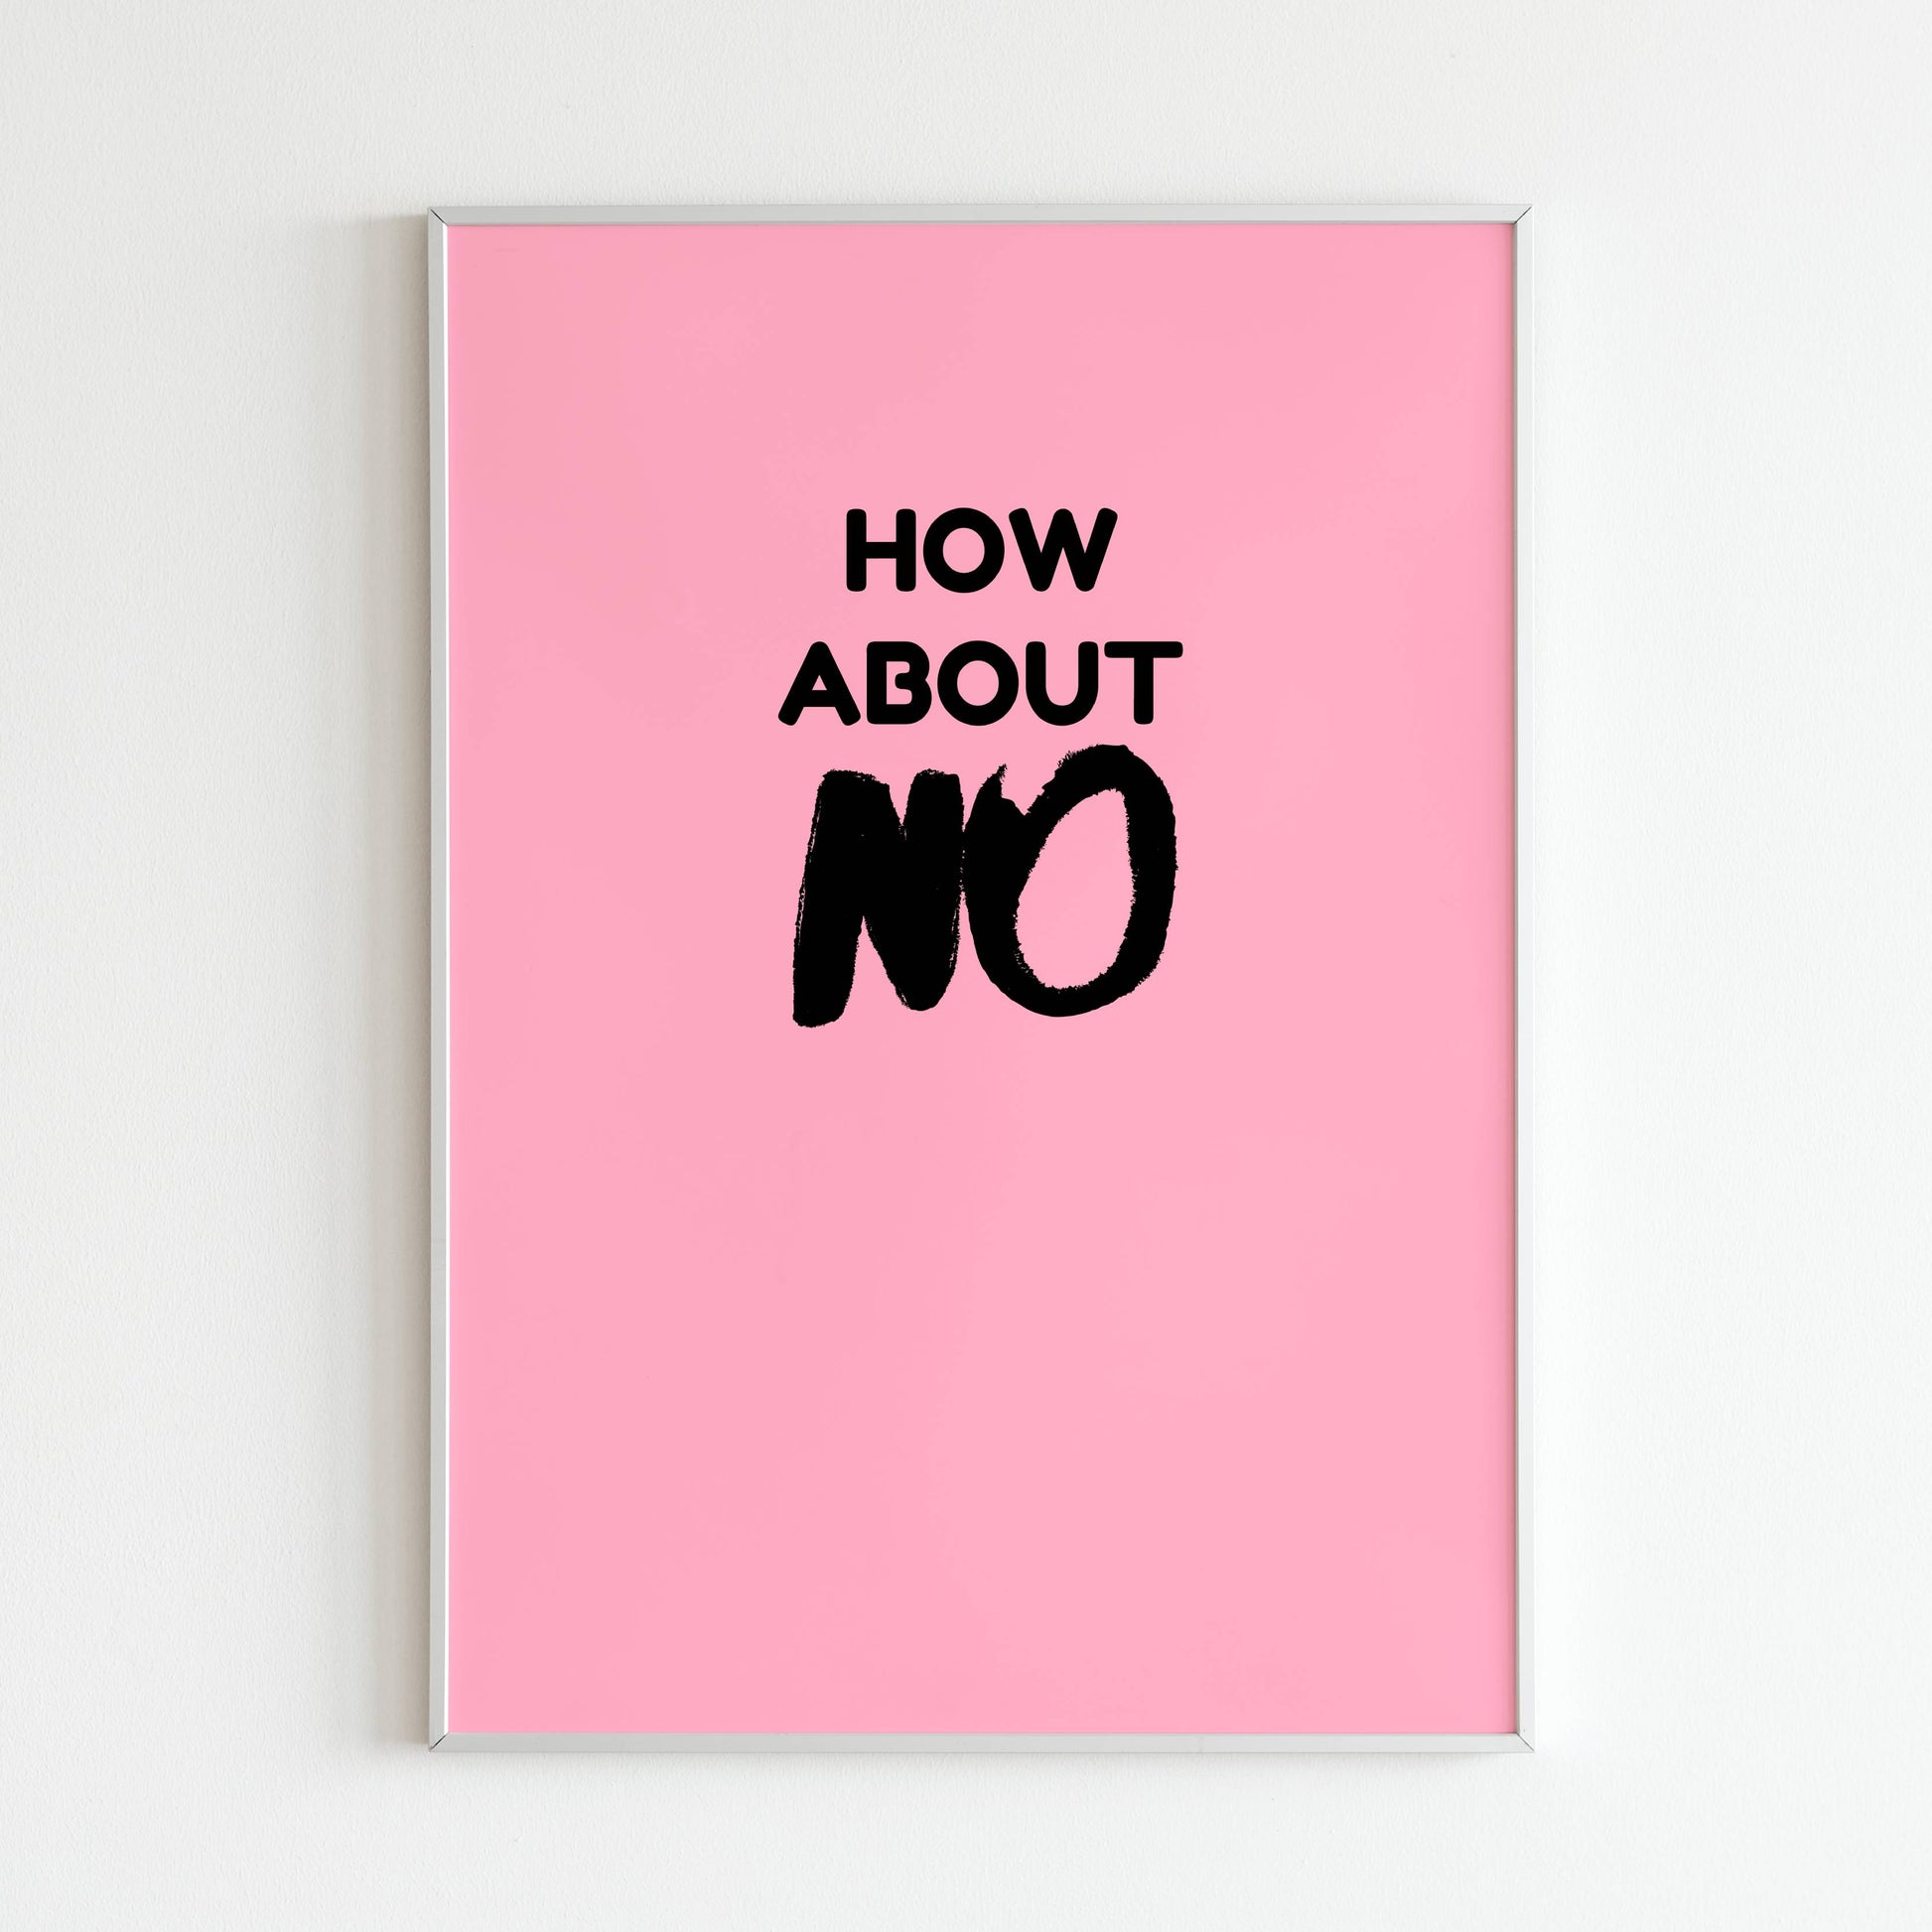 Downloadable "How about NO" art print, add a touch of humor while asserting yourself.